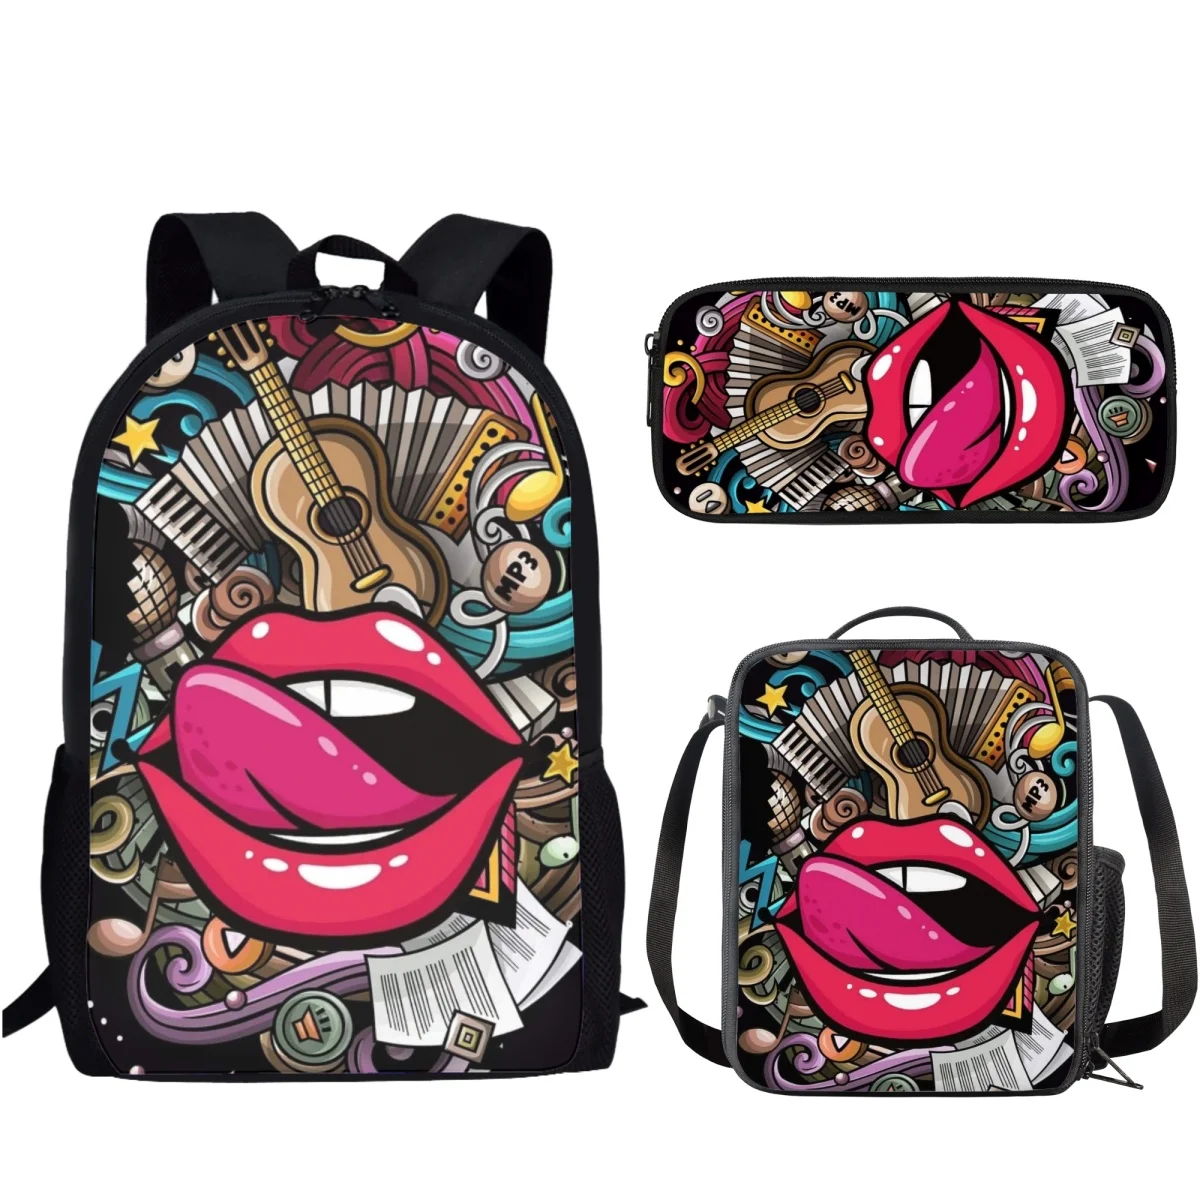 

Sexy Lip Design 3Pcs/Set School Bag Causal Backpack for Teenager Girls Boys Student Campus Book Bag with Lunch Bag Pencil Bag